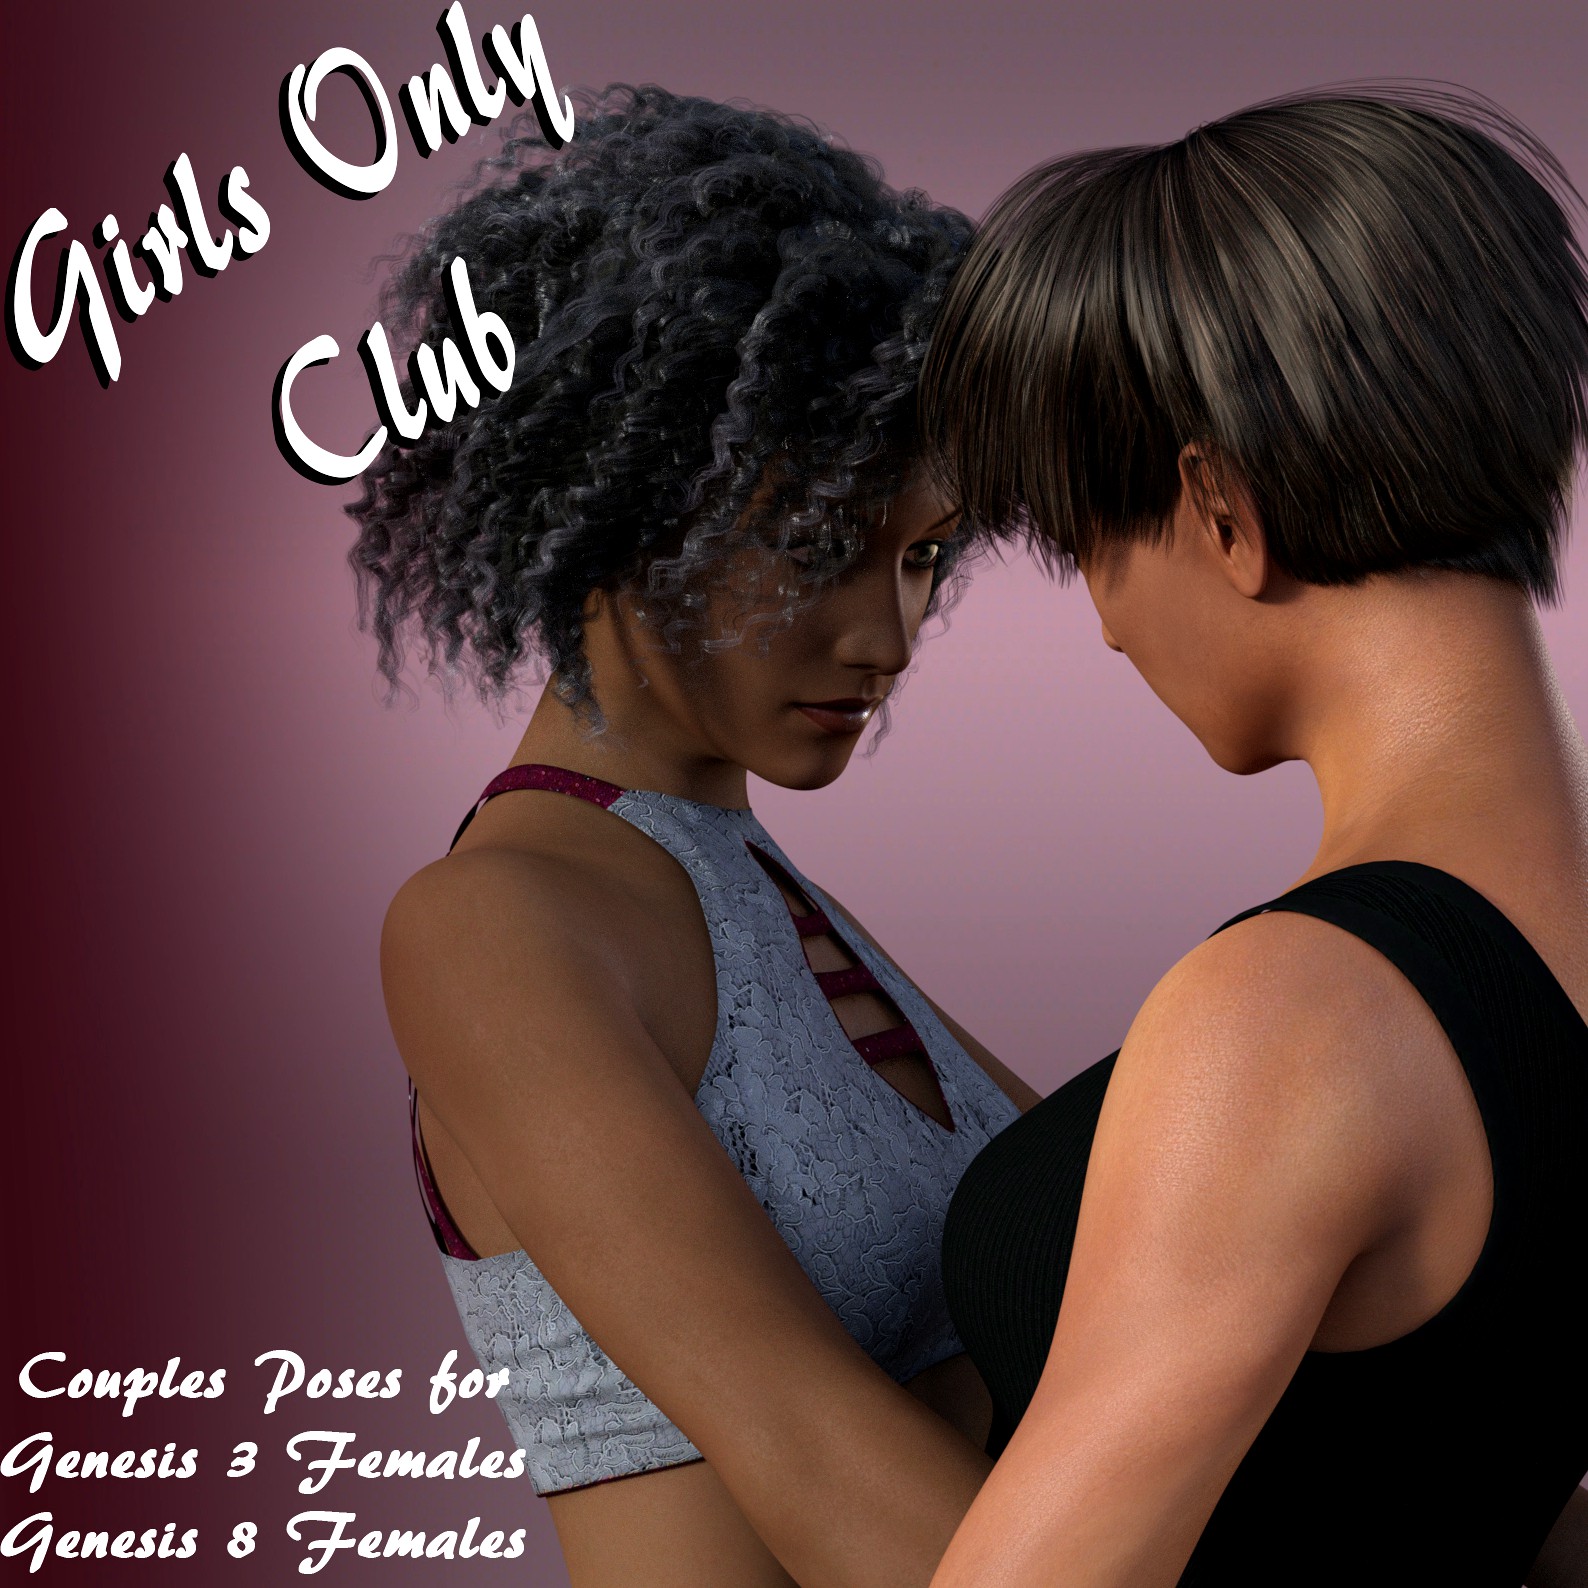 Girls Only Club: Couples Poses for G3F and G8F